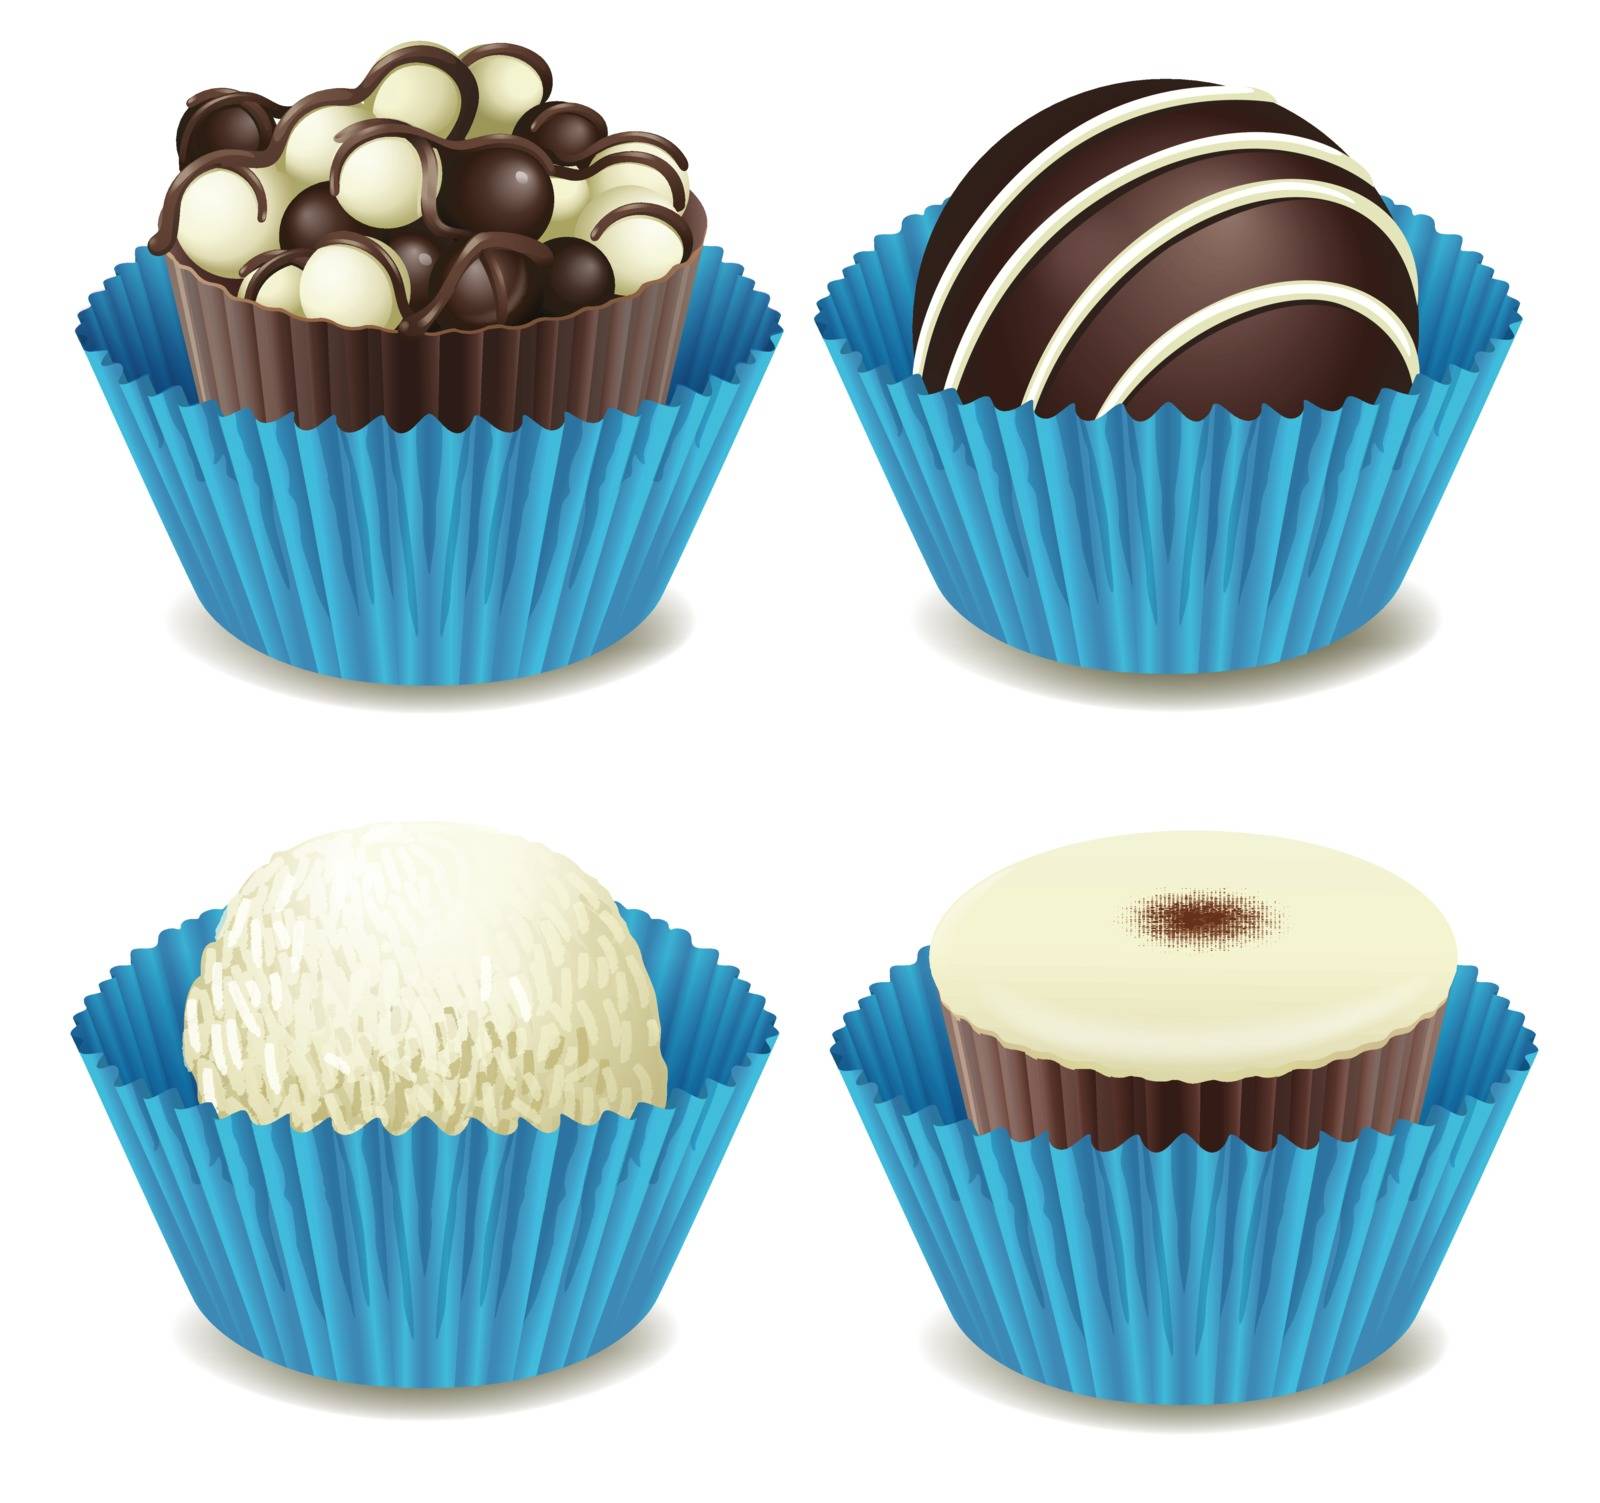 illustration of chocolates in a blue cup on a white background